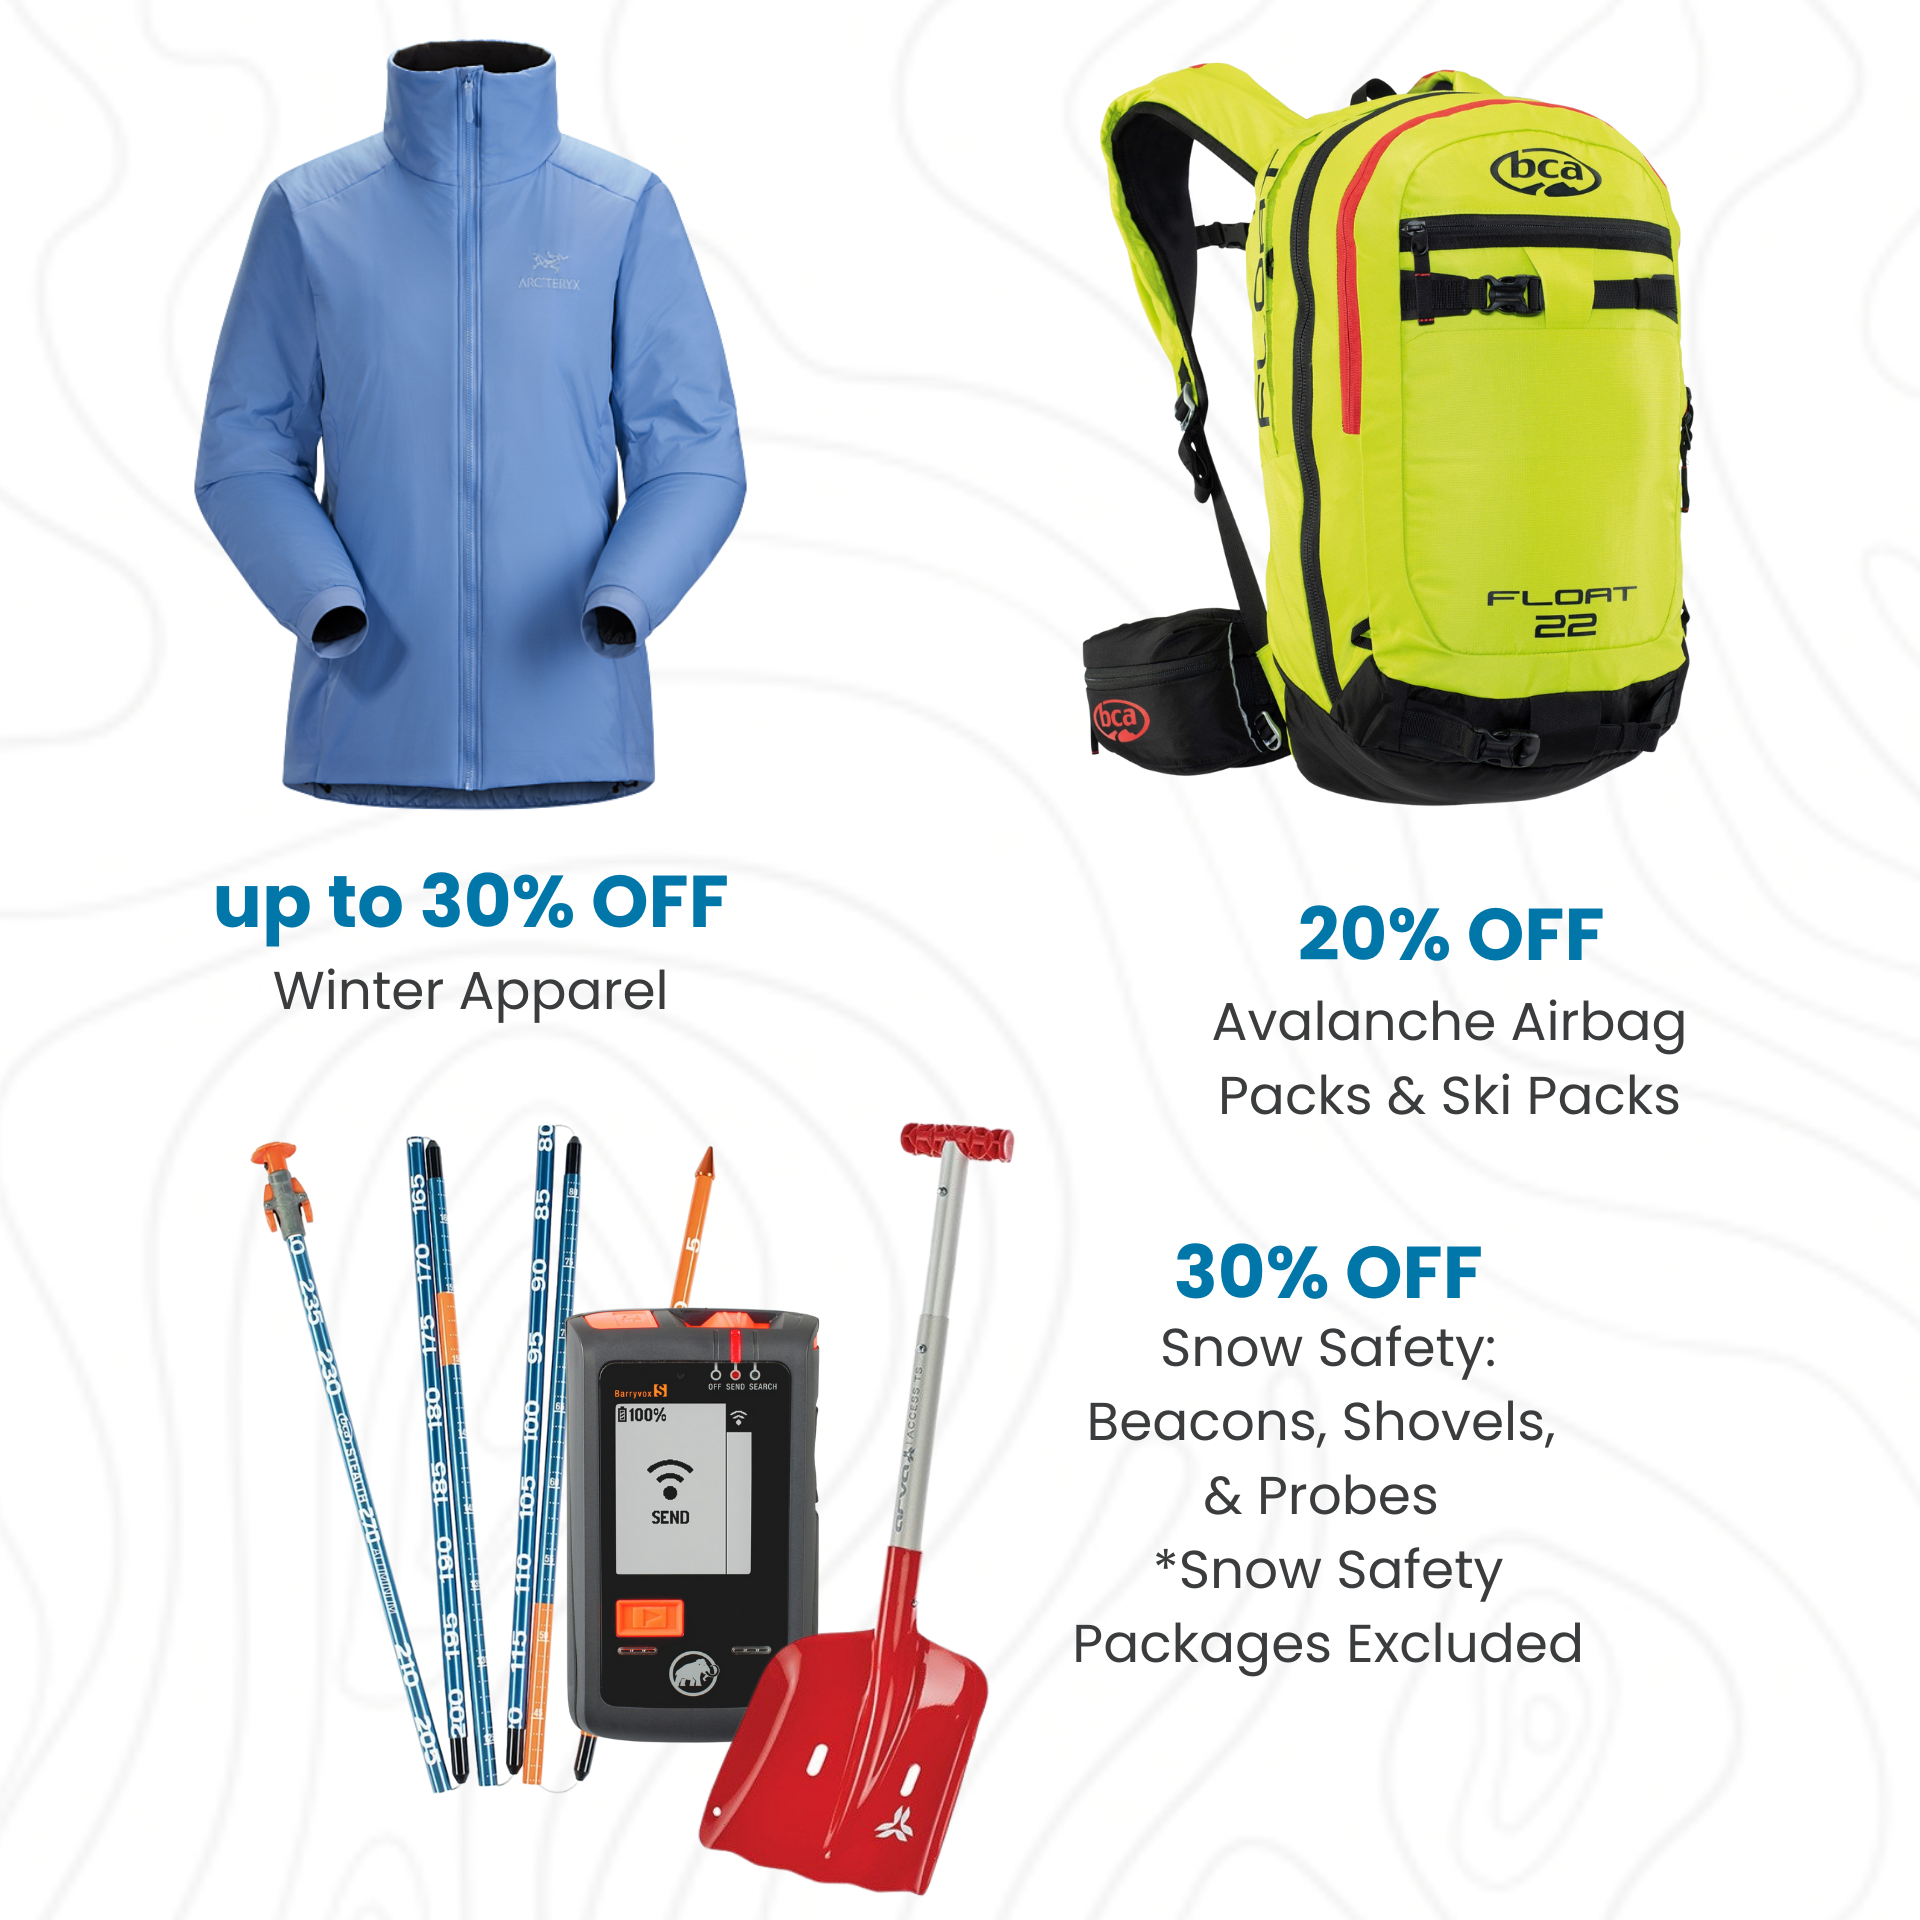 Up to 30% off winter apparel; 20% off avalanche airbags & Snow safety gear (beacons, shovels, probes) *excludes snow safety packages